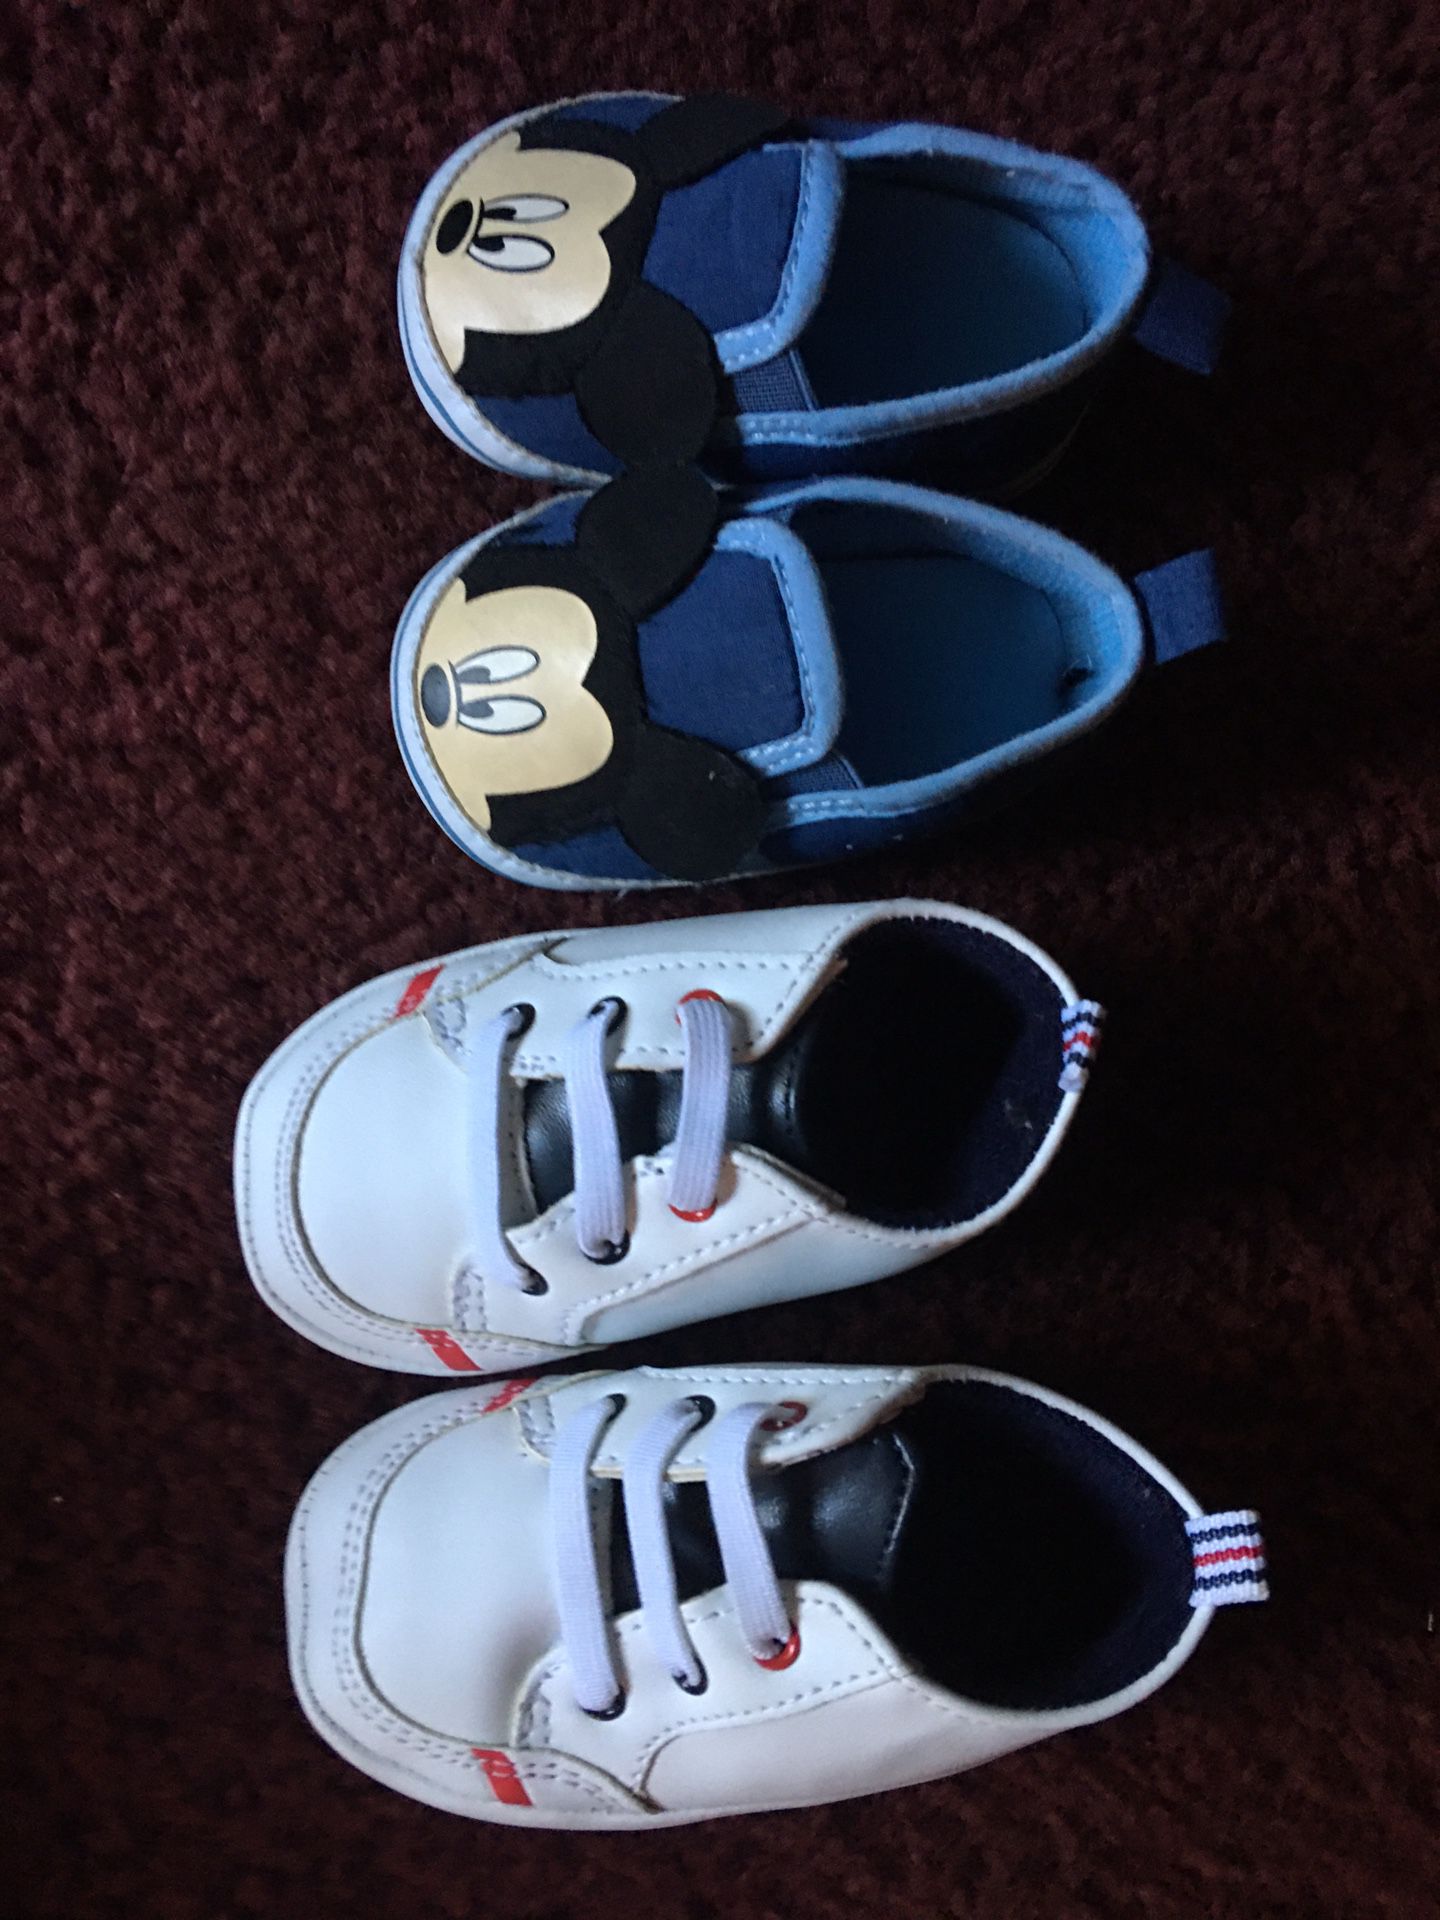 Baby shoes $1